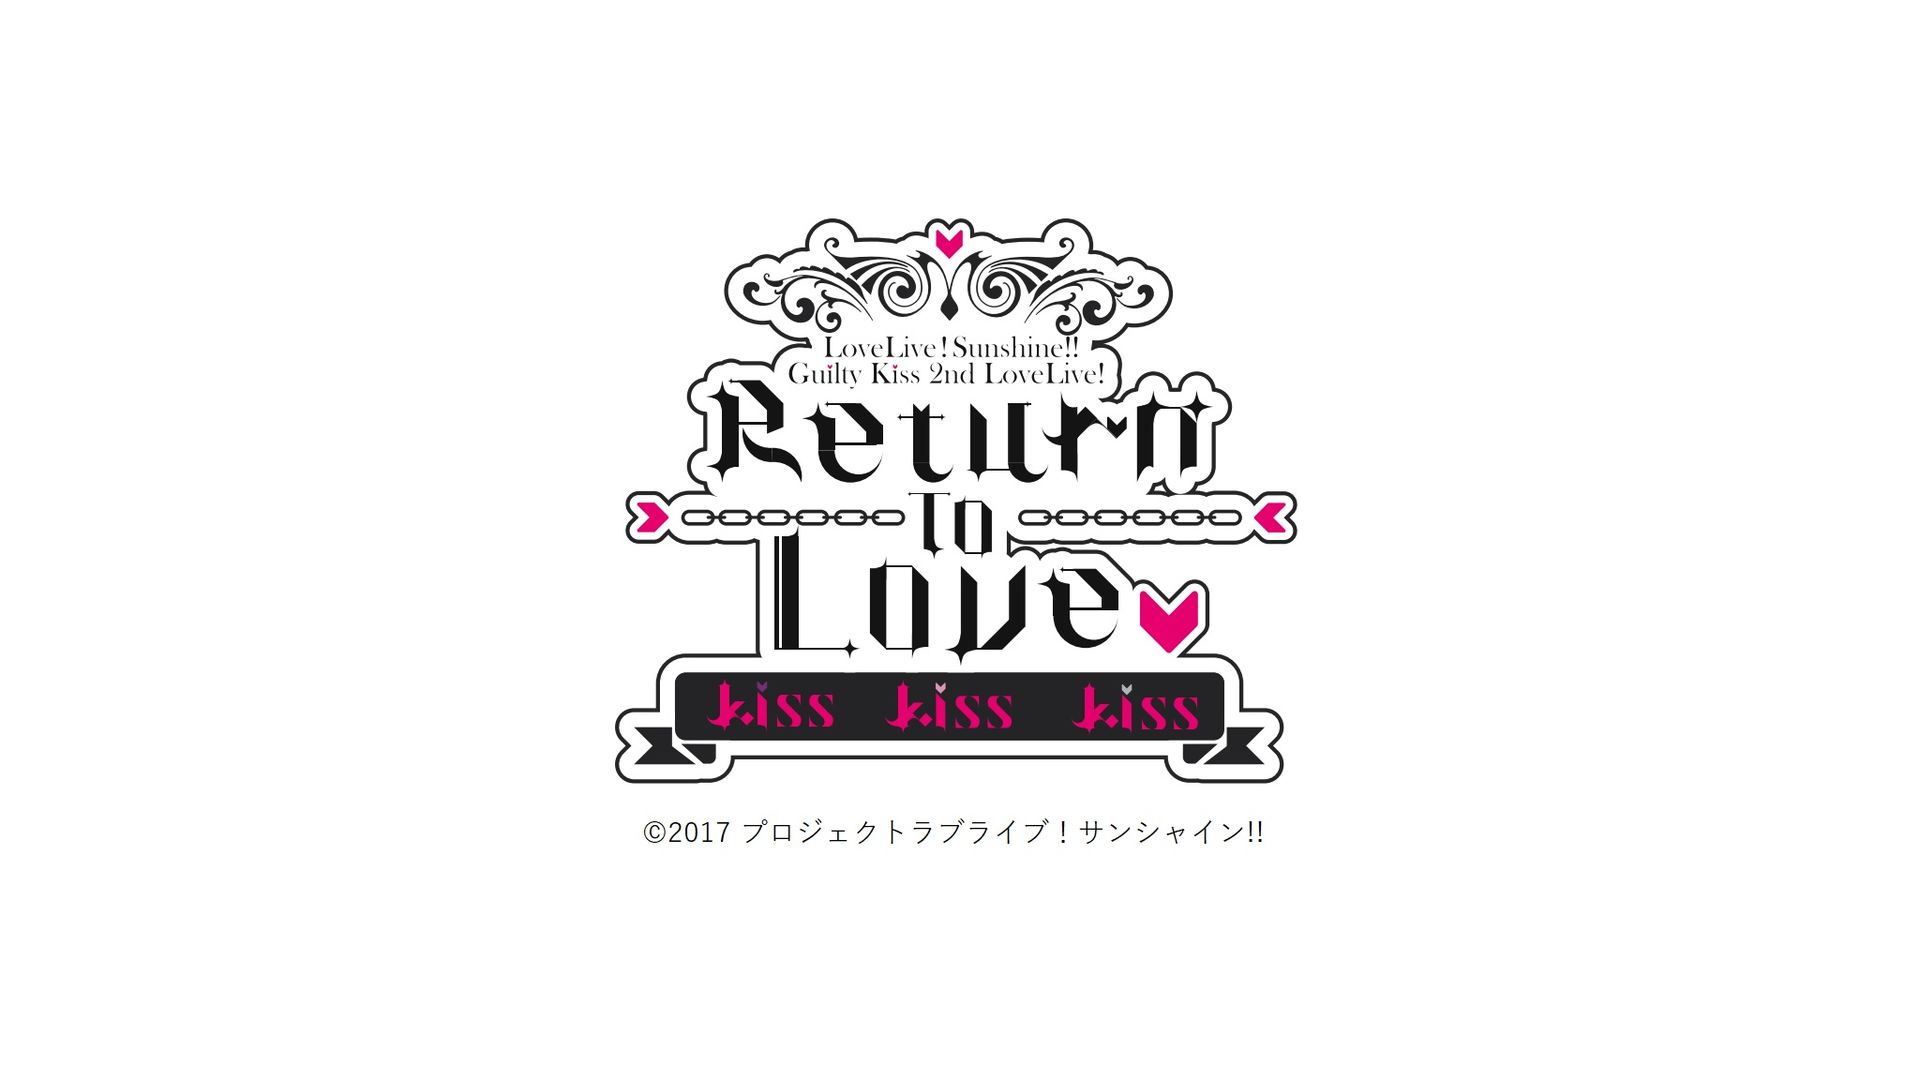 [Streaming+] Love Live! Sunshine!! Guilty Kiss 2nd LoveLive! ～Return To Love ♡ Kiss Kiss Kiss～ [Go To Event]